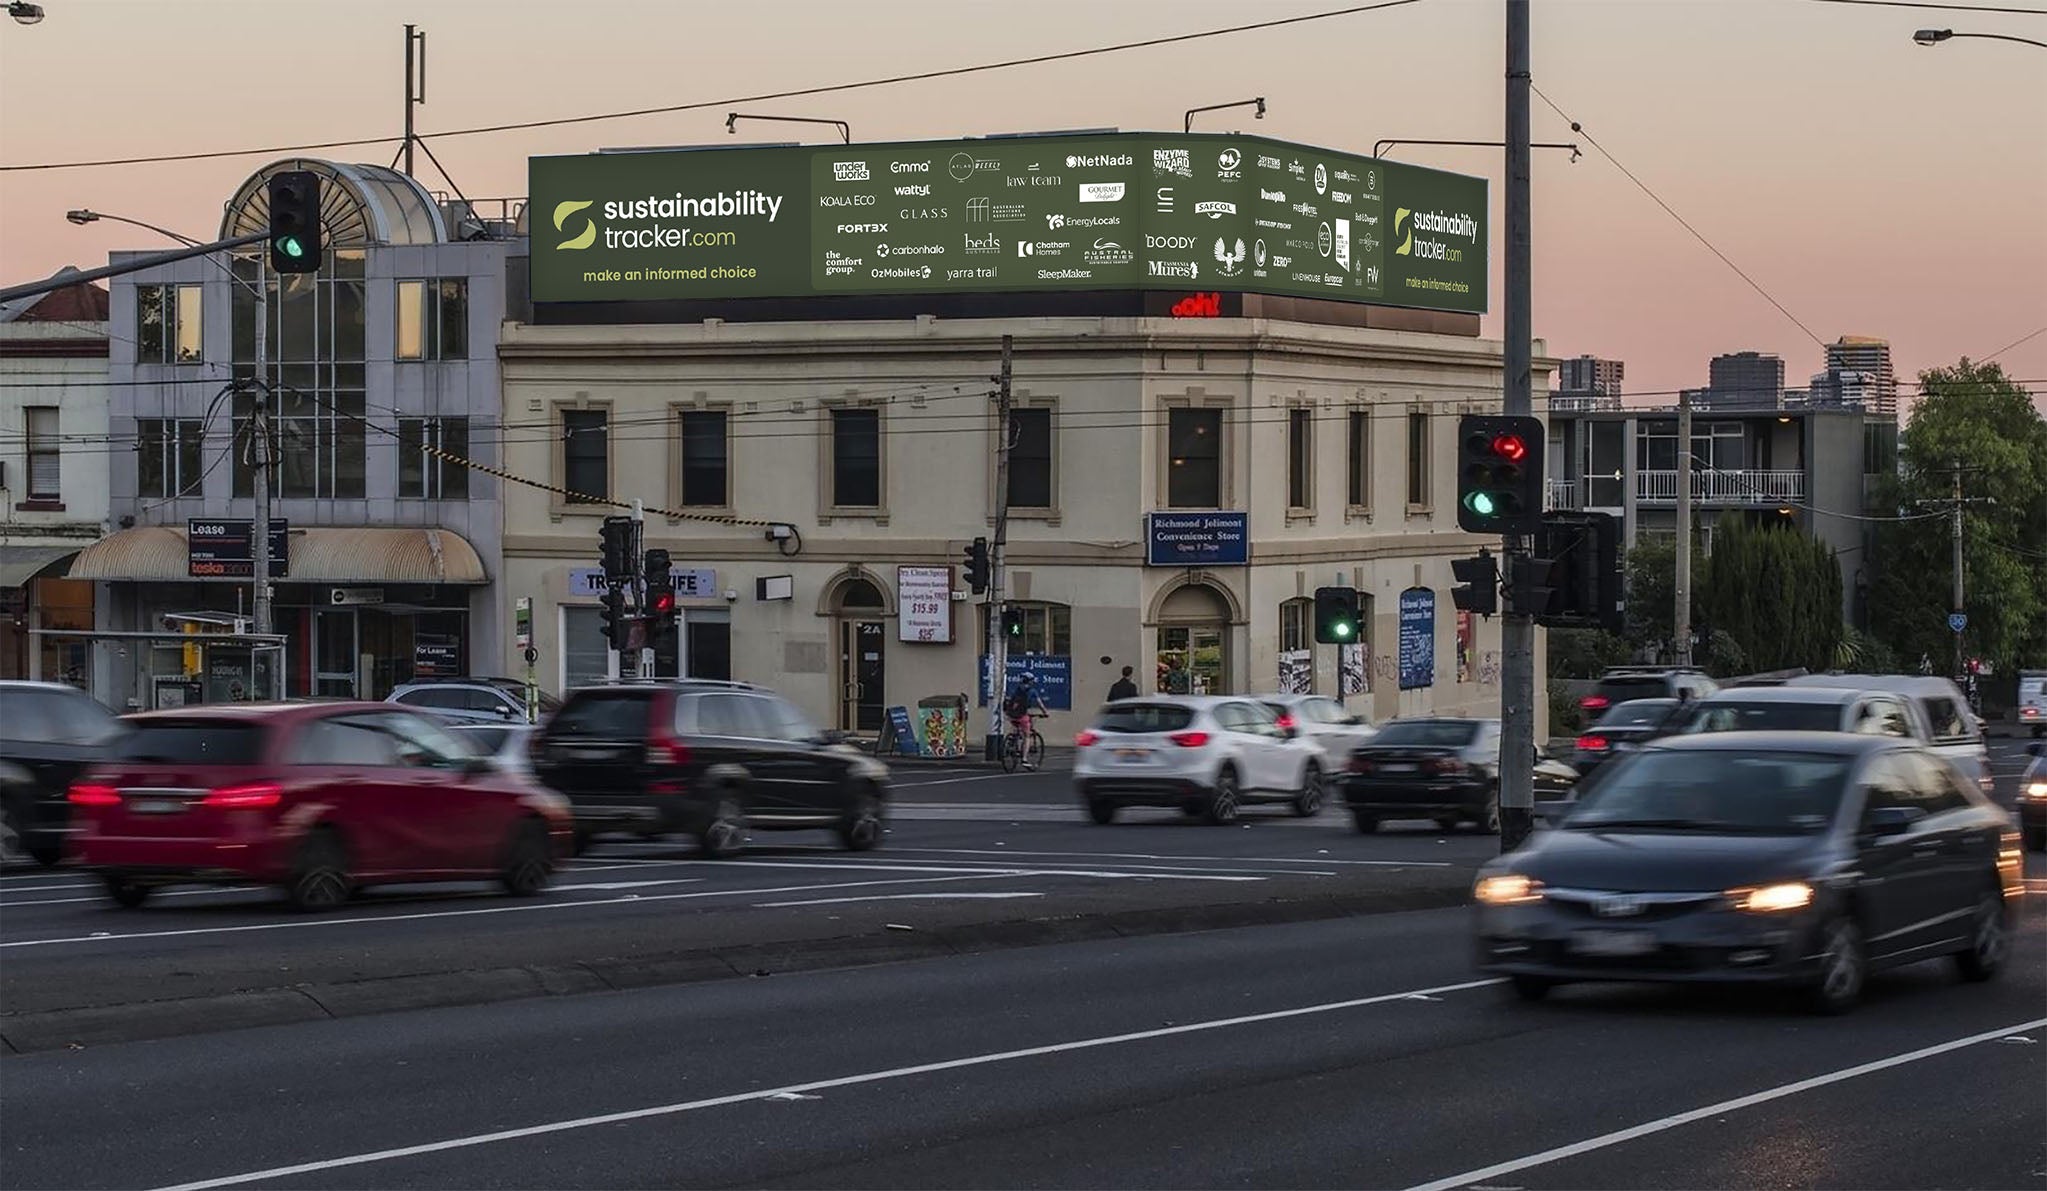 We're on the Sustainability Tracker billboard!